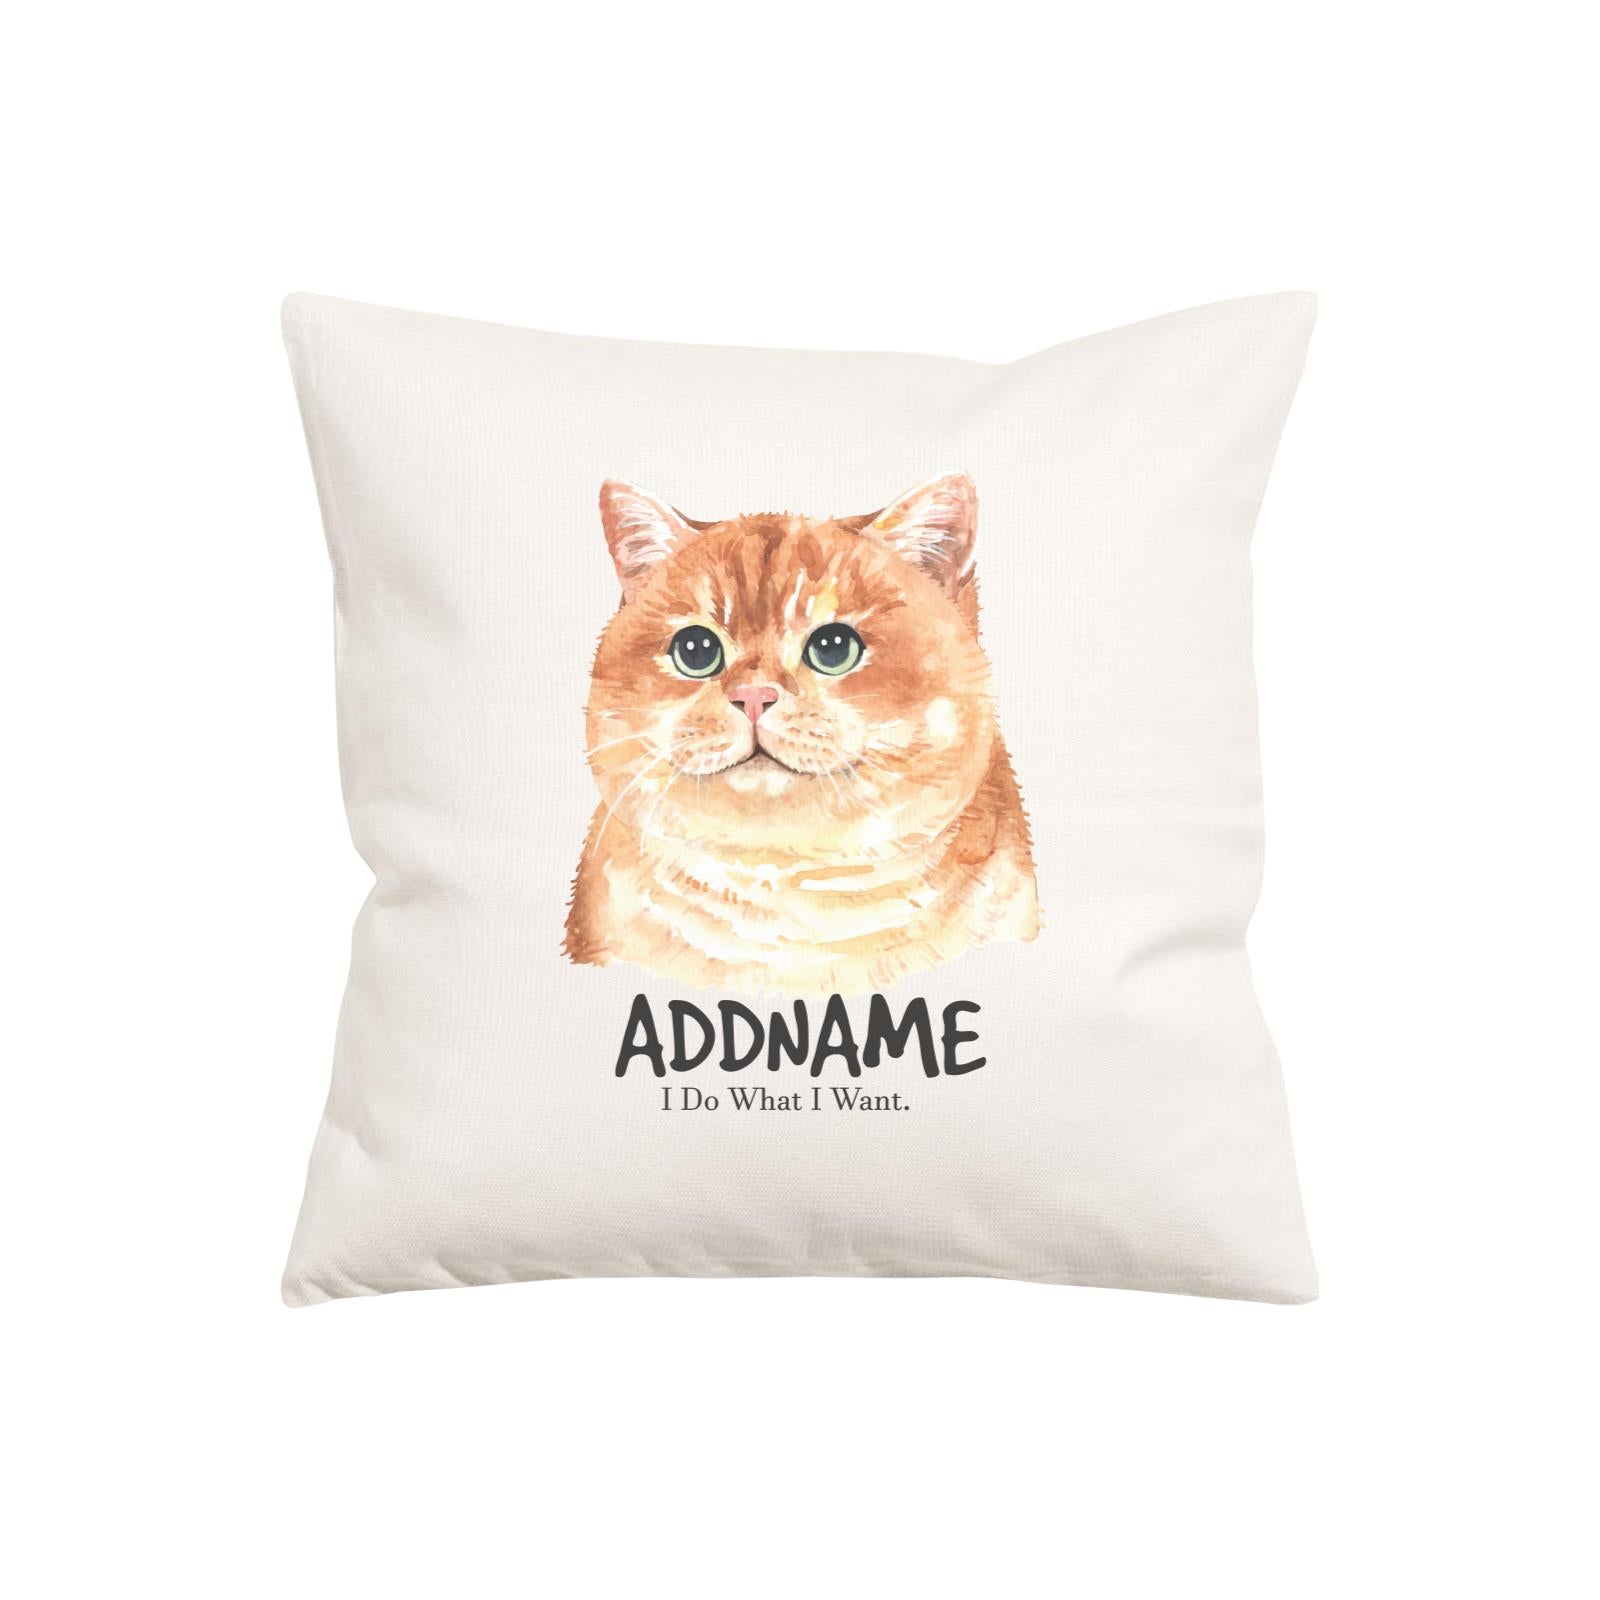 Watercolor Cat Series Fat Cat I Do What I Want Addname Pillow Cushion